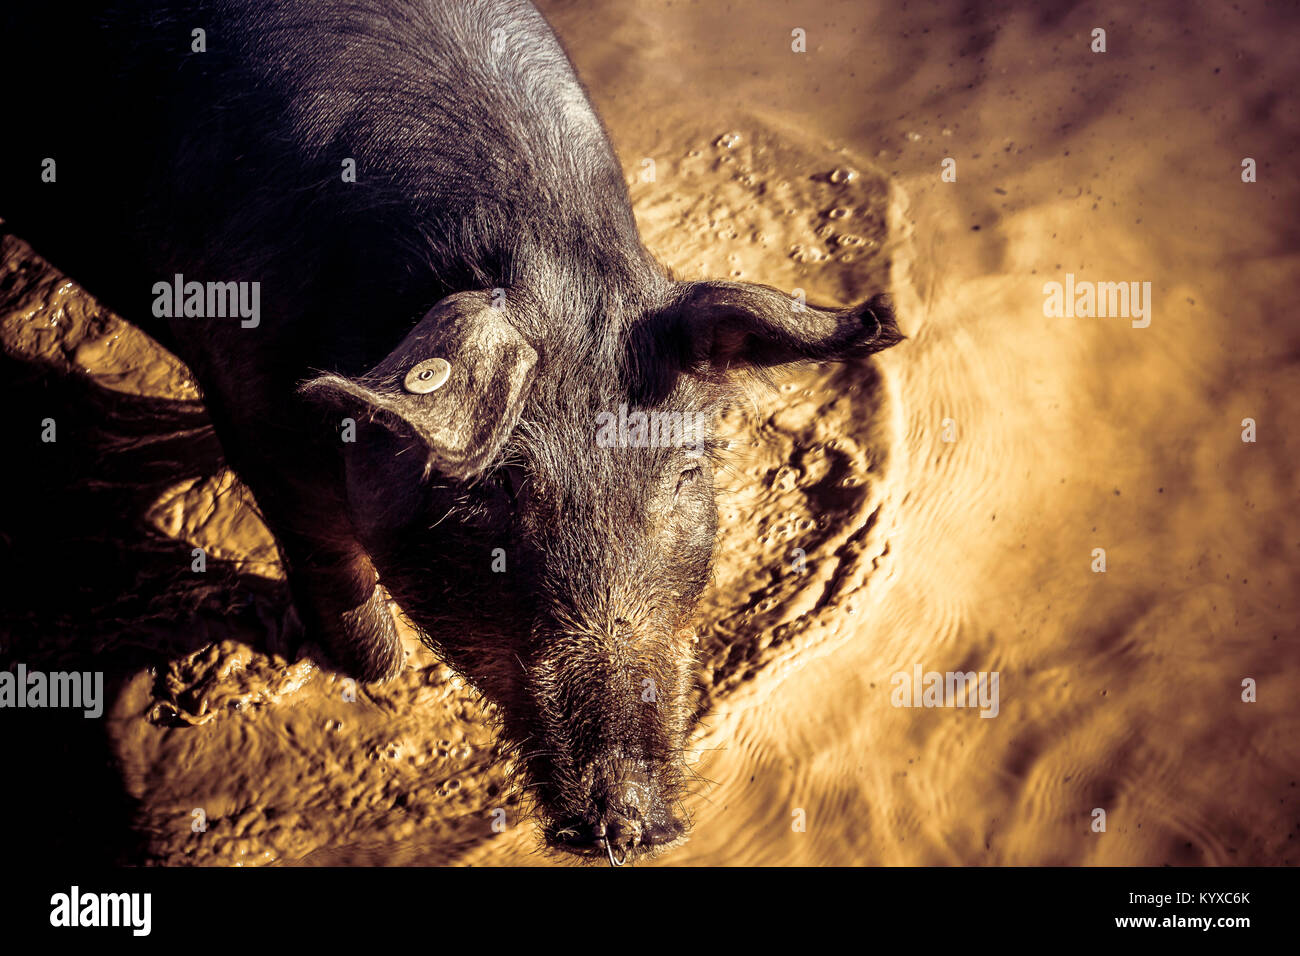 Pig in the dirty water Stock Photo